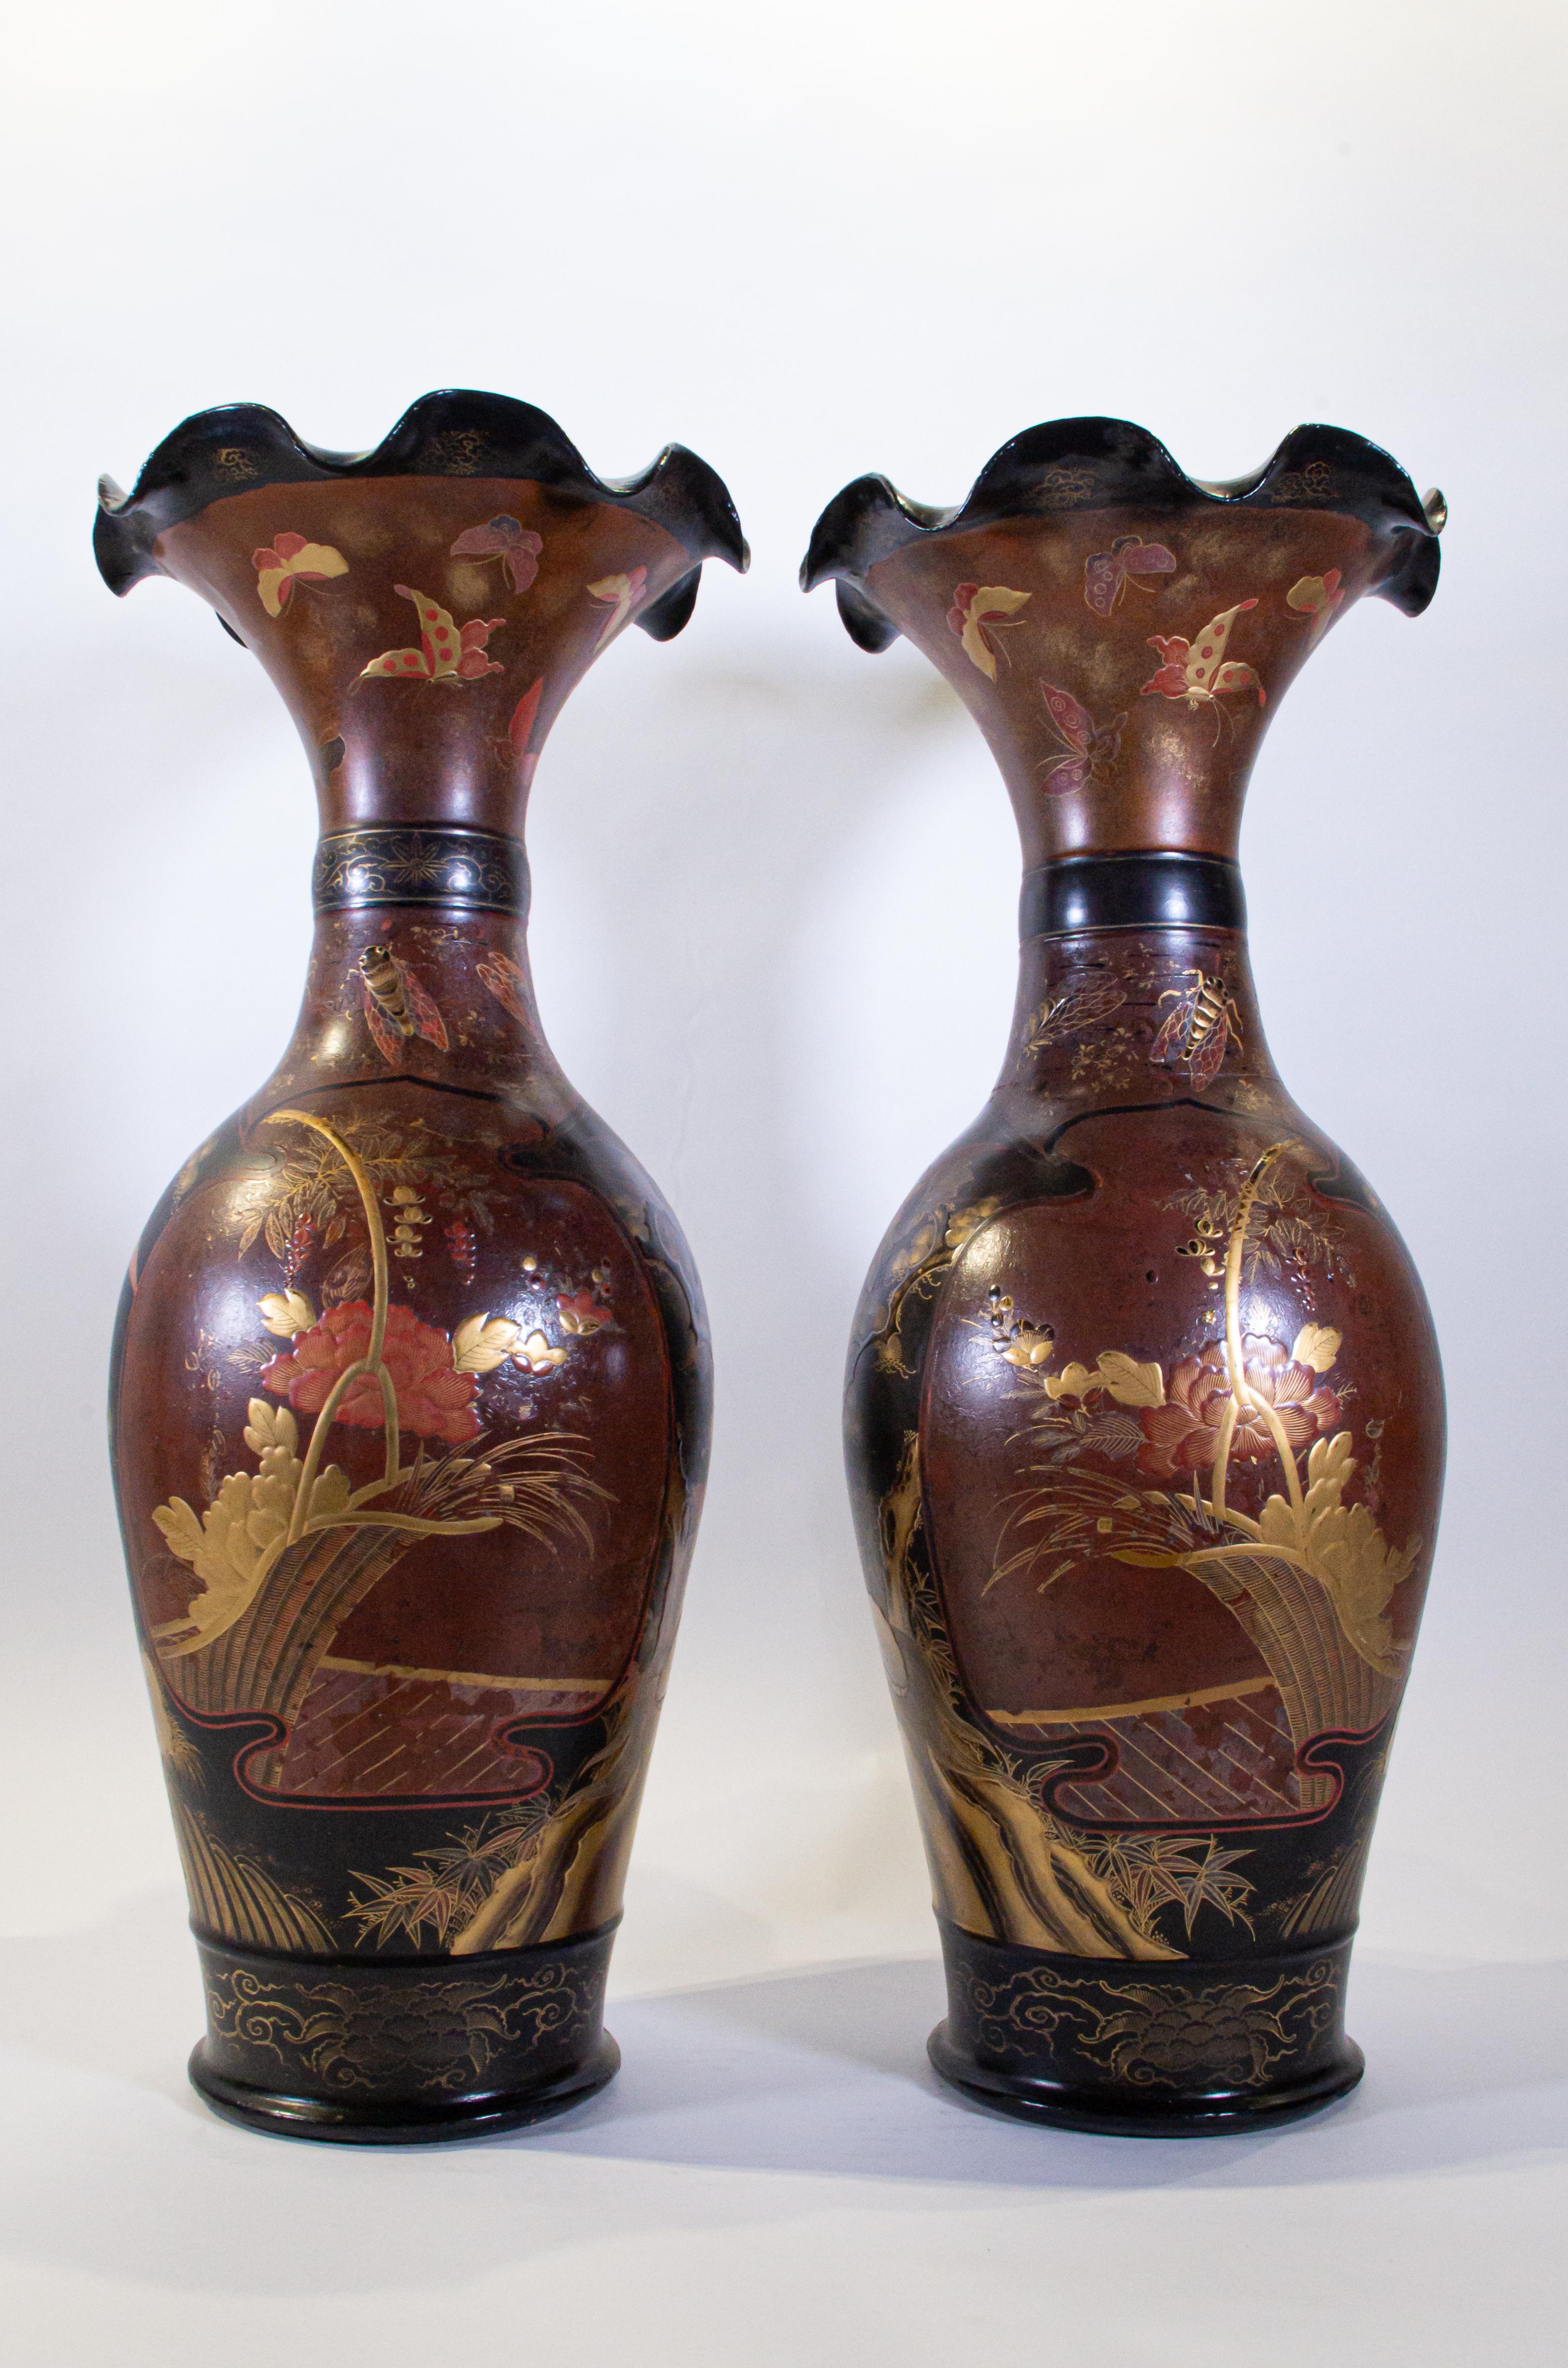 A monumental and unusual pair of antique 19th century Japanese porcelain poly-chrome lacquered vases. Each is beautifully designed with koi fish, butterflies, trees, mystical beasts, chrysanthemum flowers, insects and clouds. All decorative aspects